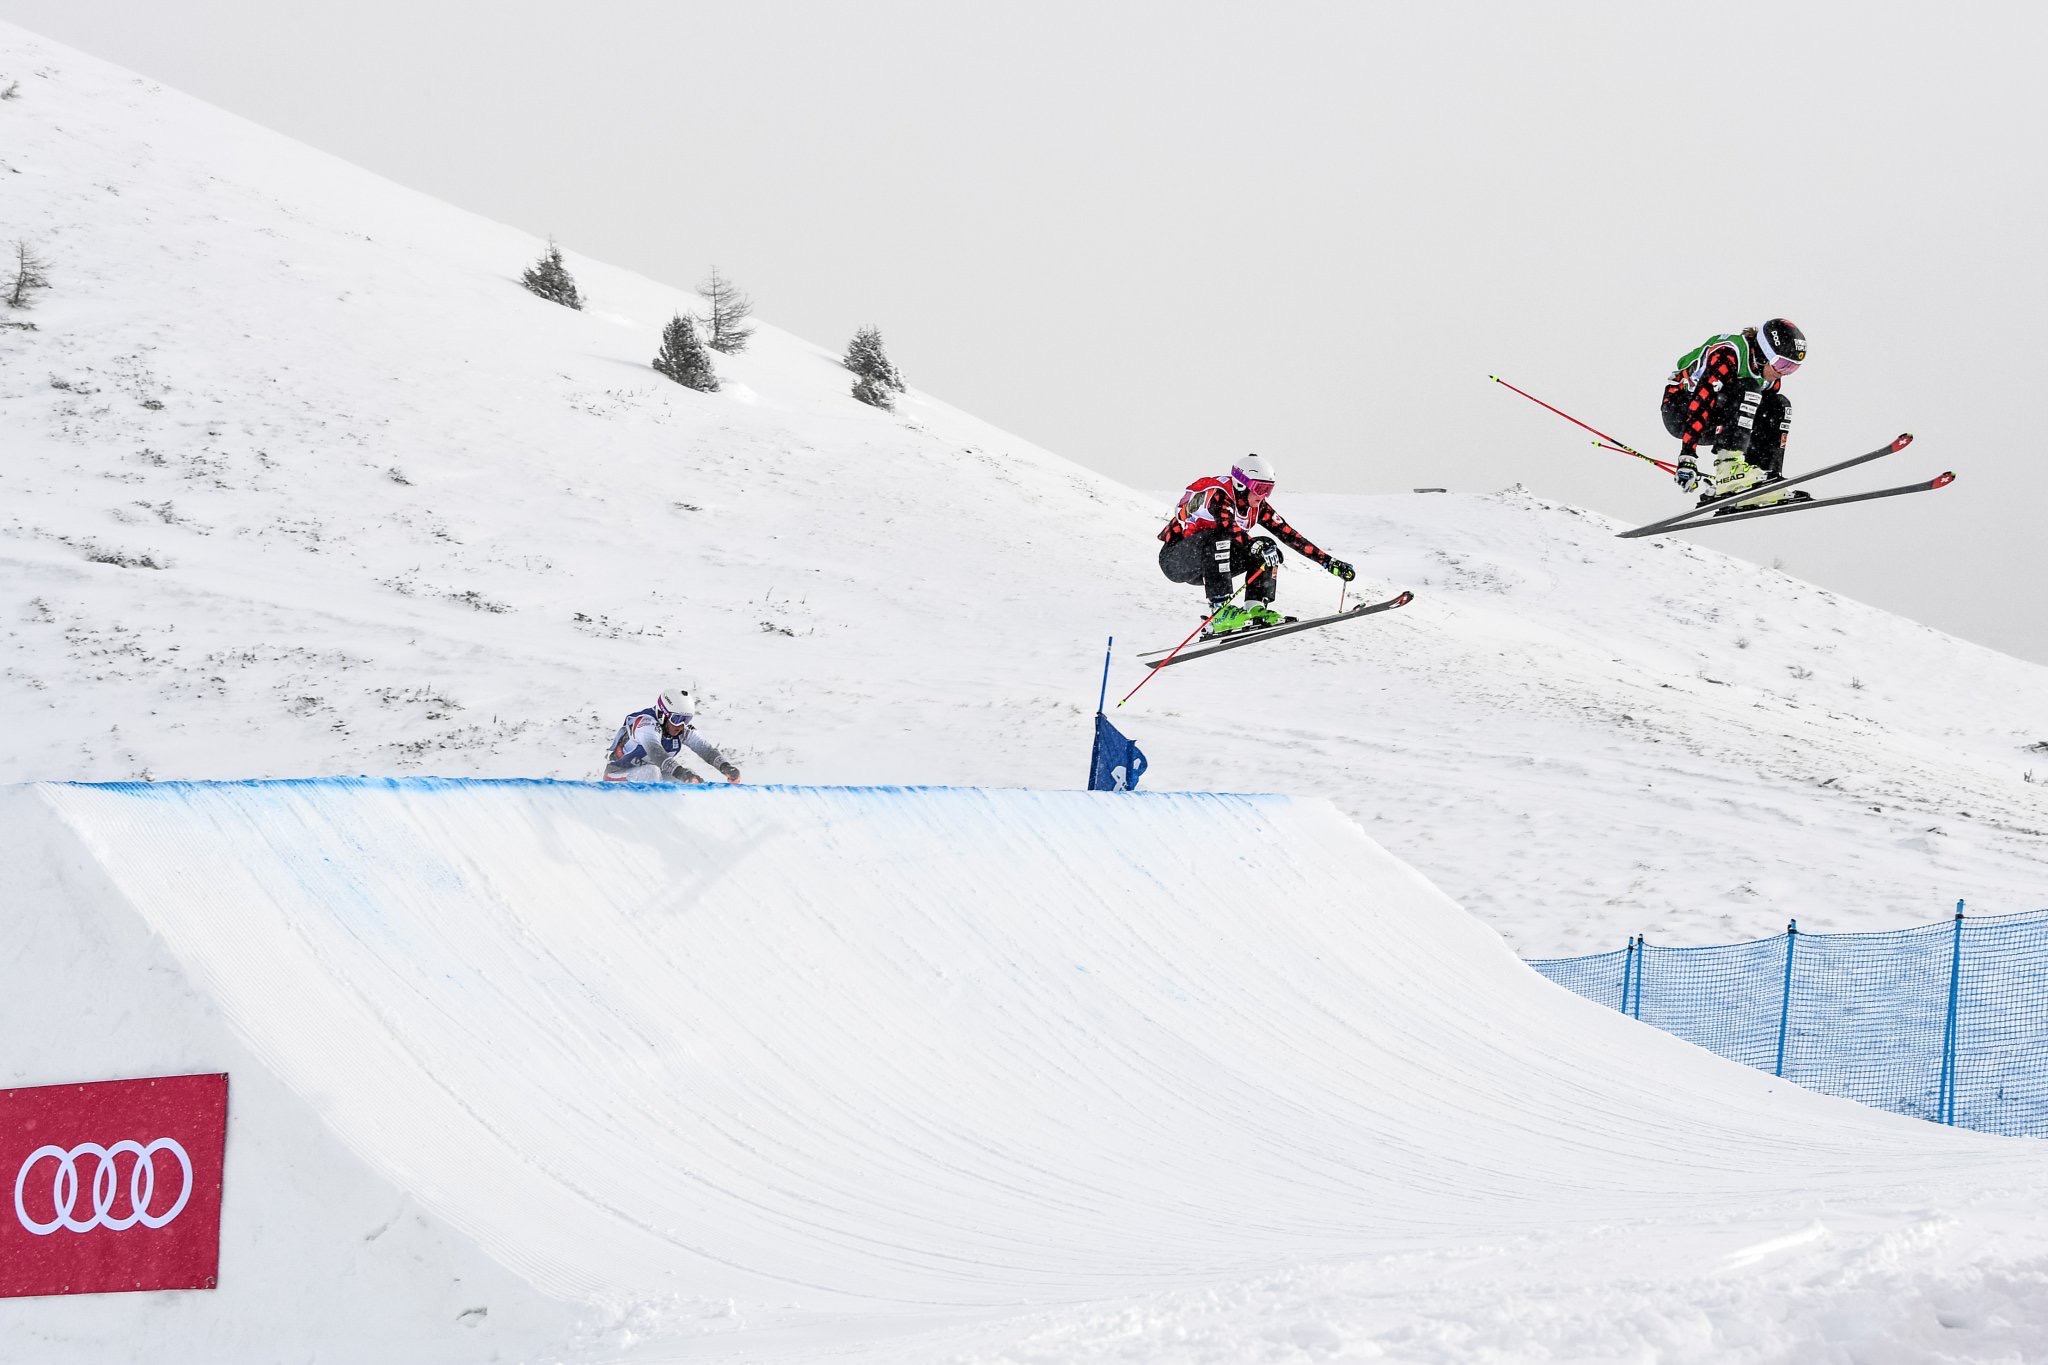 Marielle Thompson (leading) and Georgia Simmerling (in second) compete in the heats of the ski cross World Cup in Watles, Italy